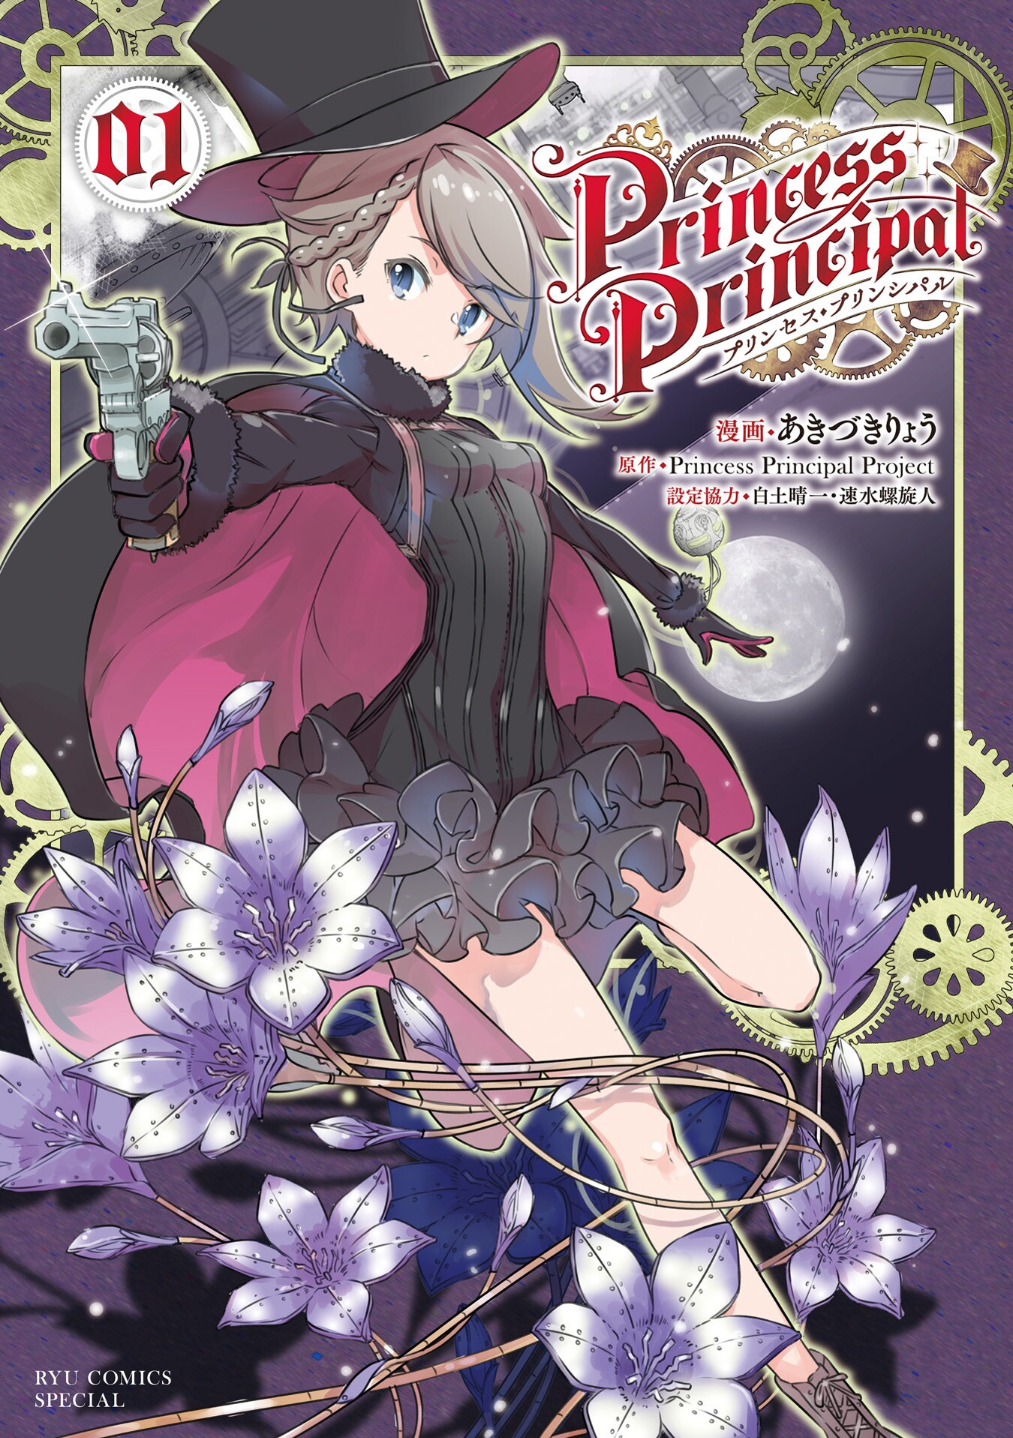 Characters similar in design to Ange from Princess Principal : r/anime